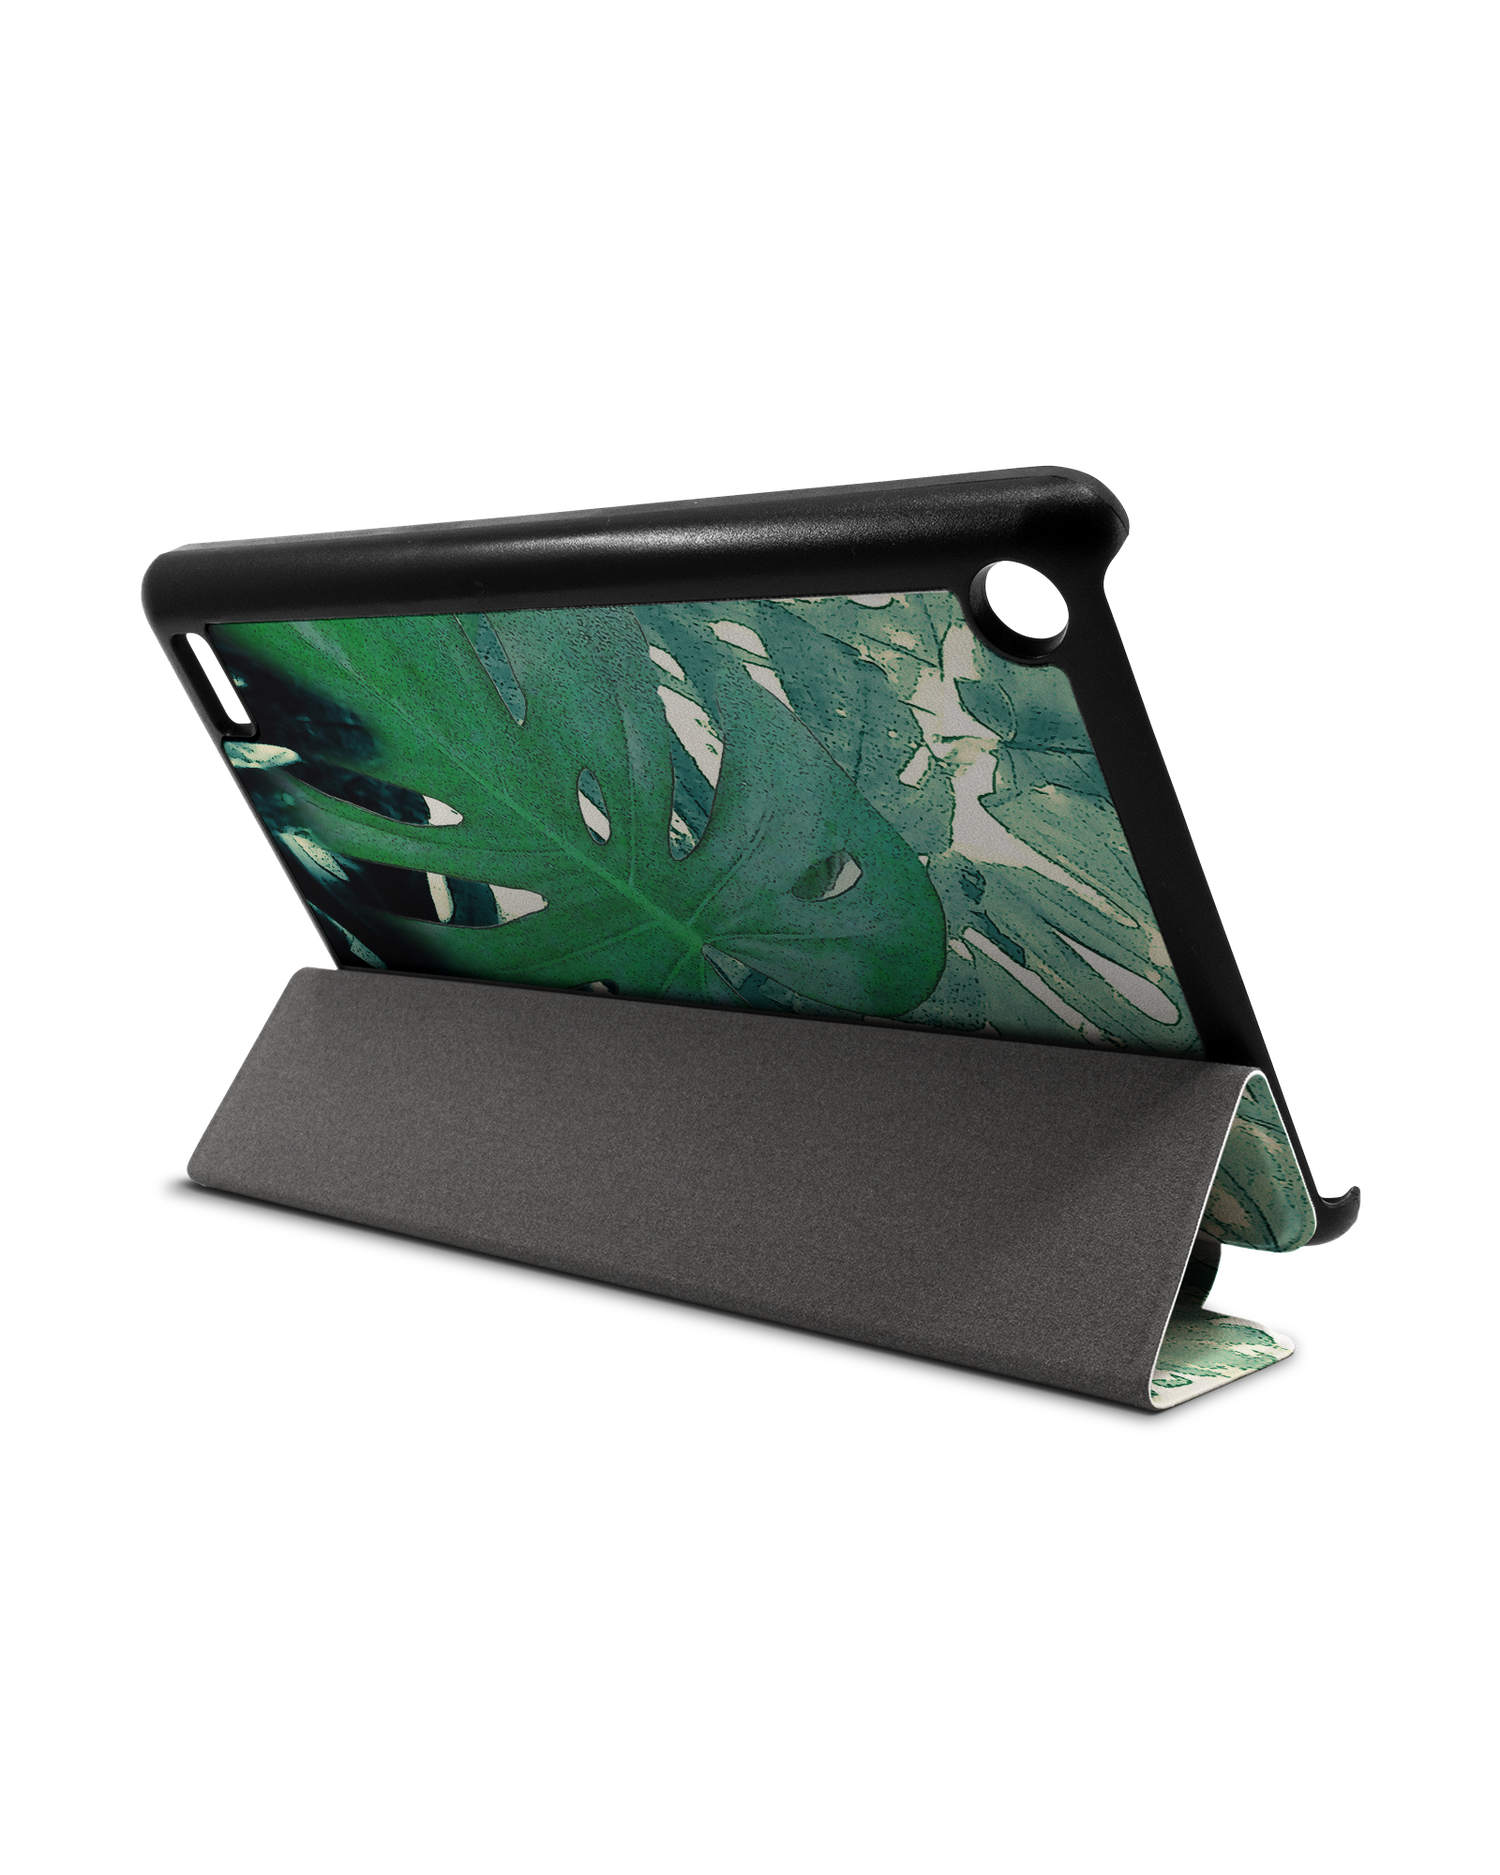 Saturated Plants Tablet Smart Case for Amazon Fire 7: Used as Stand